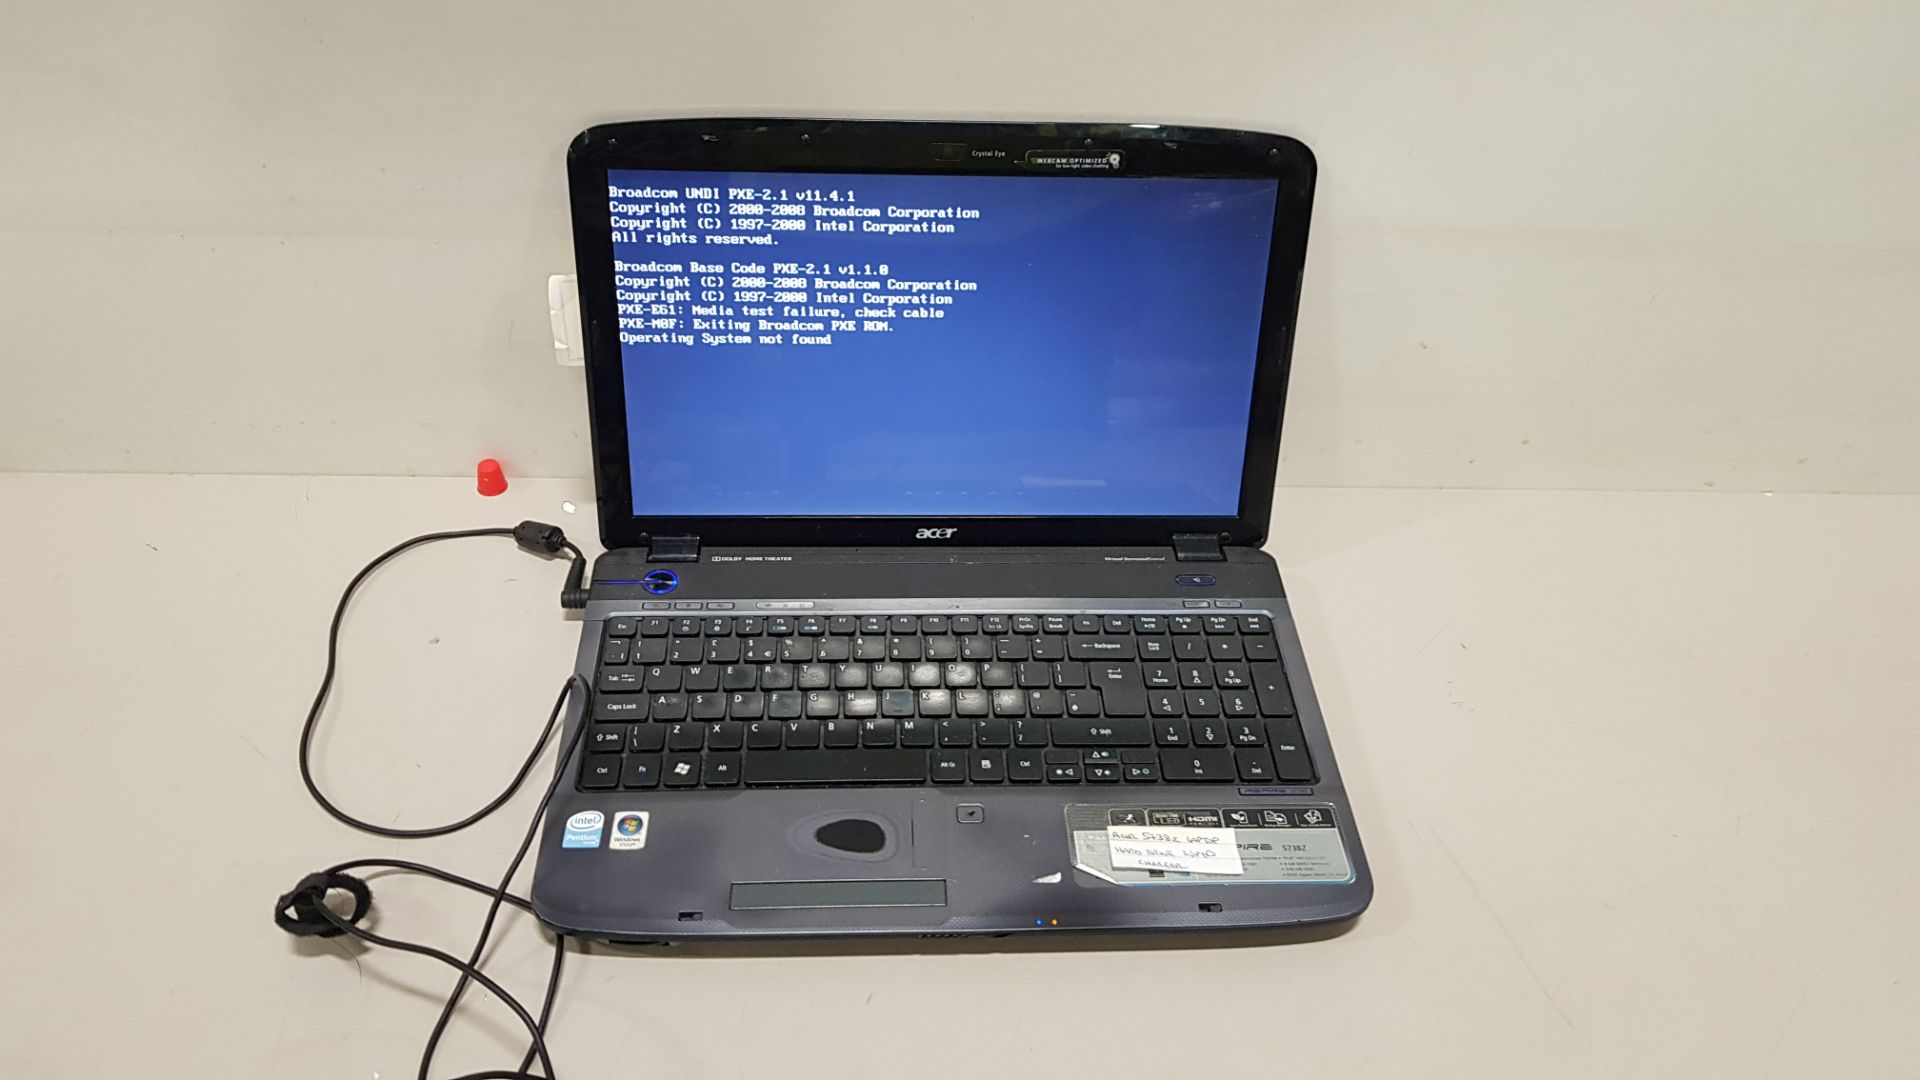 1 X ACER 57382 LAPTOP - HARD DRIVE WIPED - NO OS - COMES WITH CHARGER